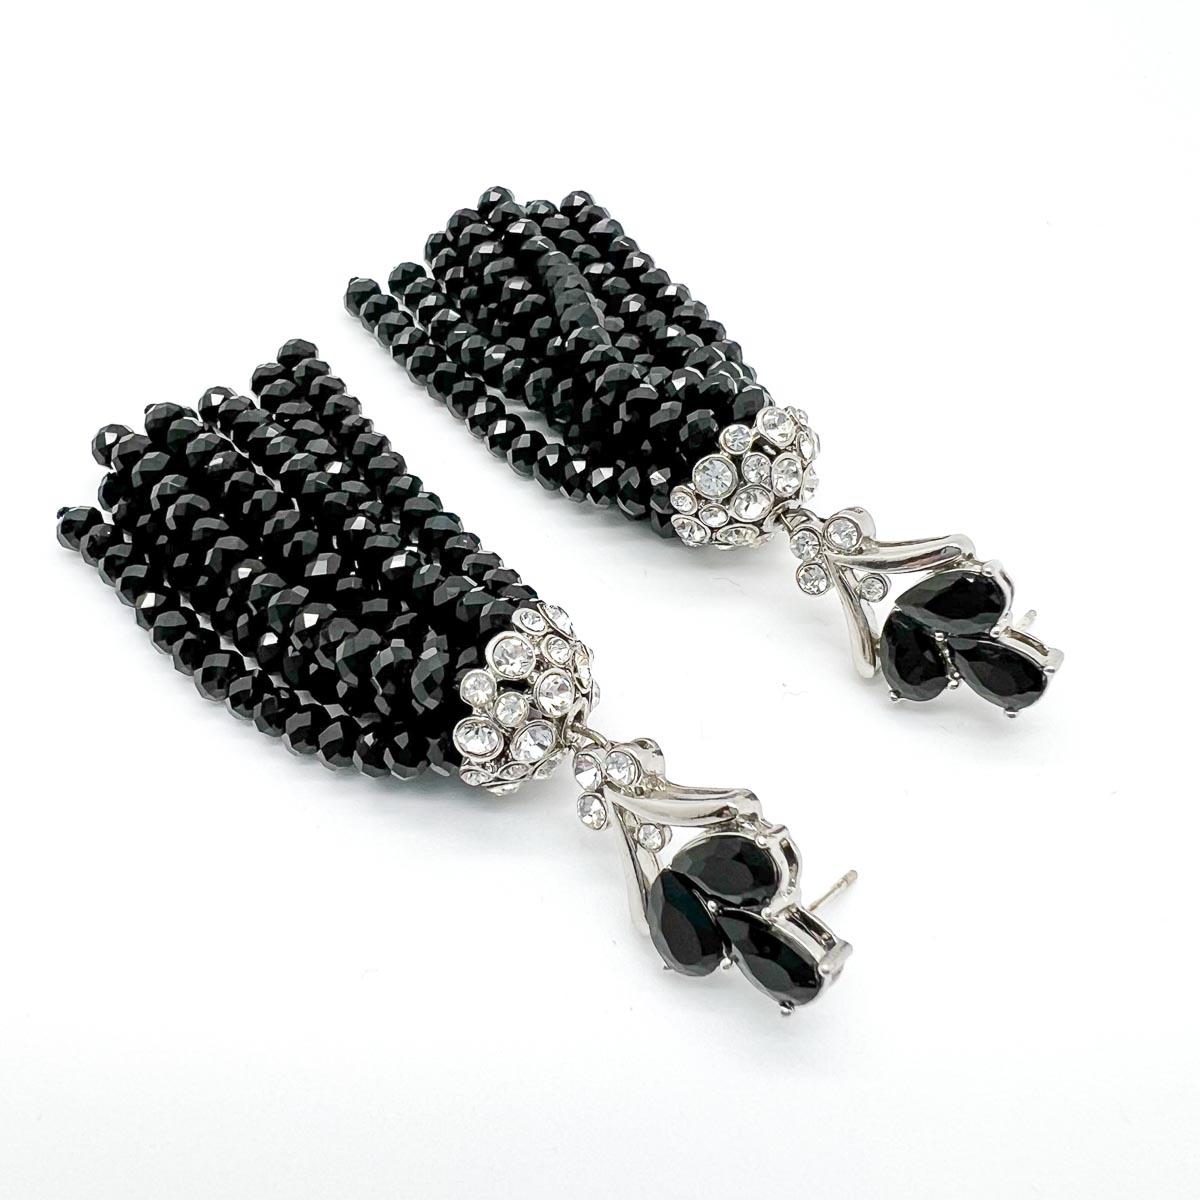 Vintage Monet Deco Inspired Tassel Earrings 1990s In Good Condition For Sale In Wilmslow, GB